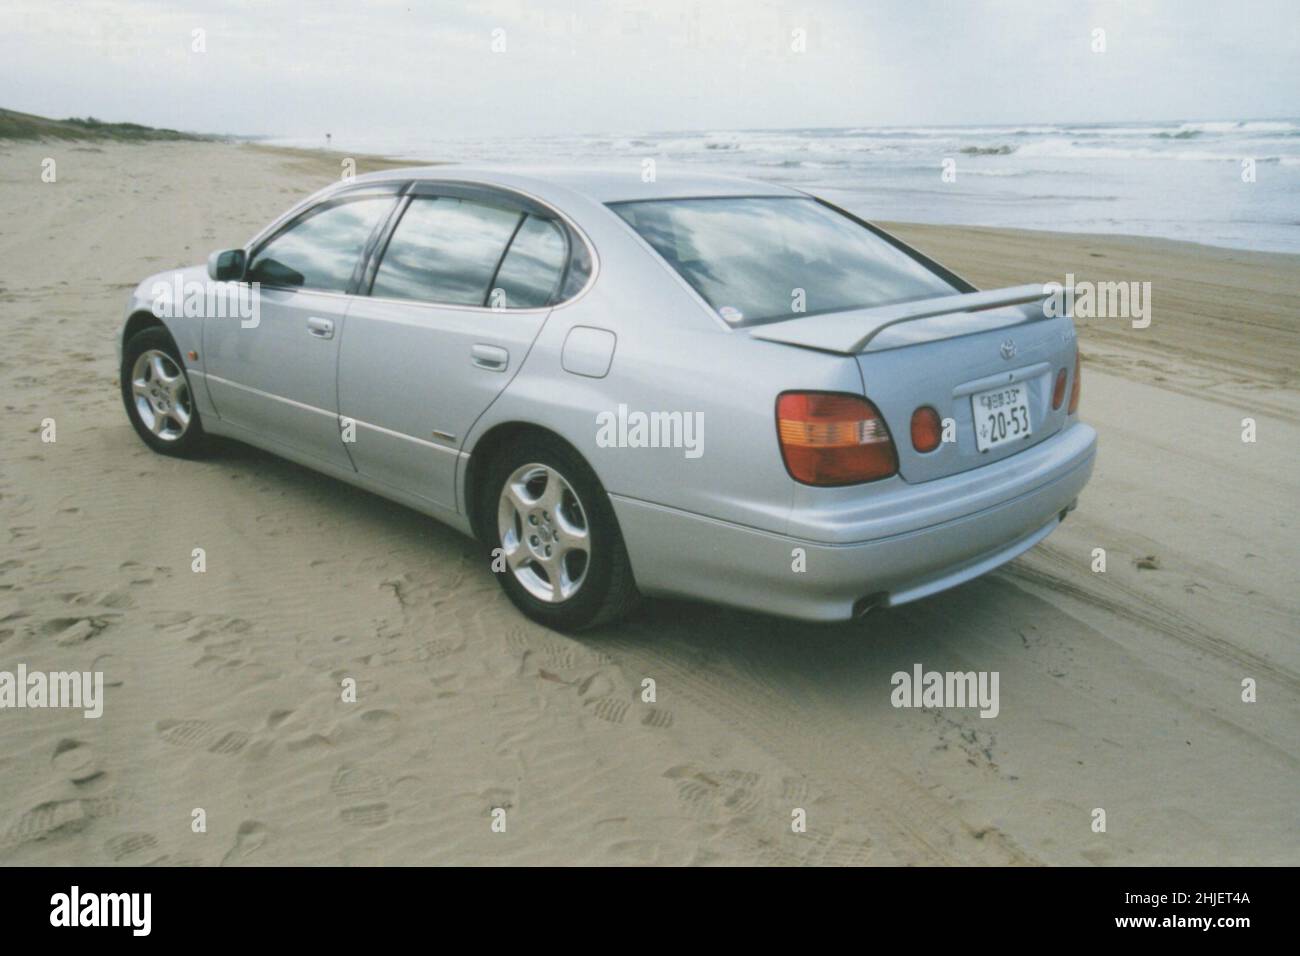 Toyota Car Aristo. Scanned Copy of Archival Photo Stock Photo